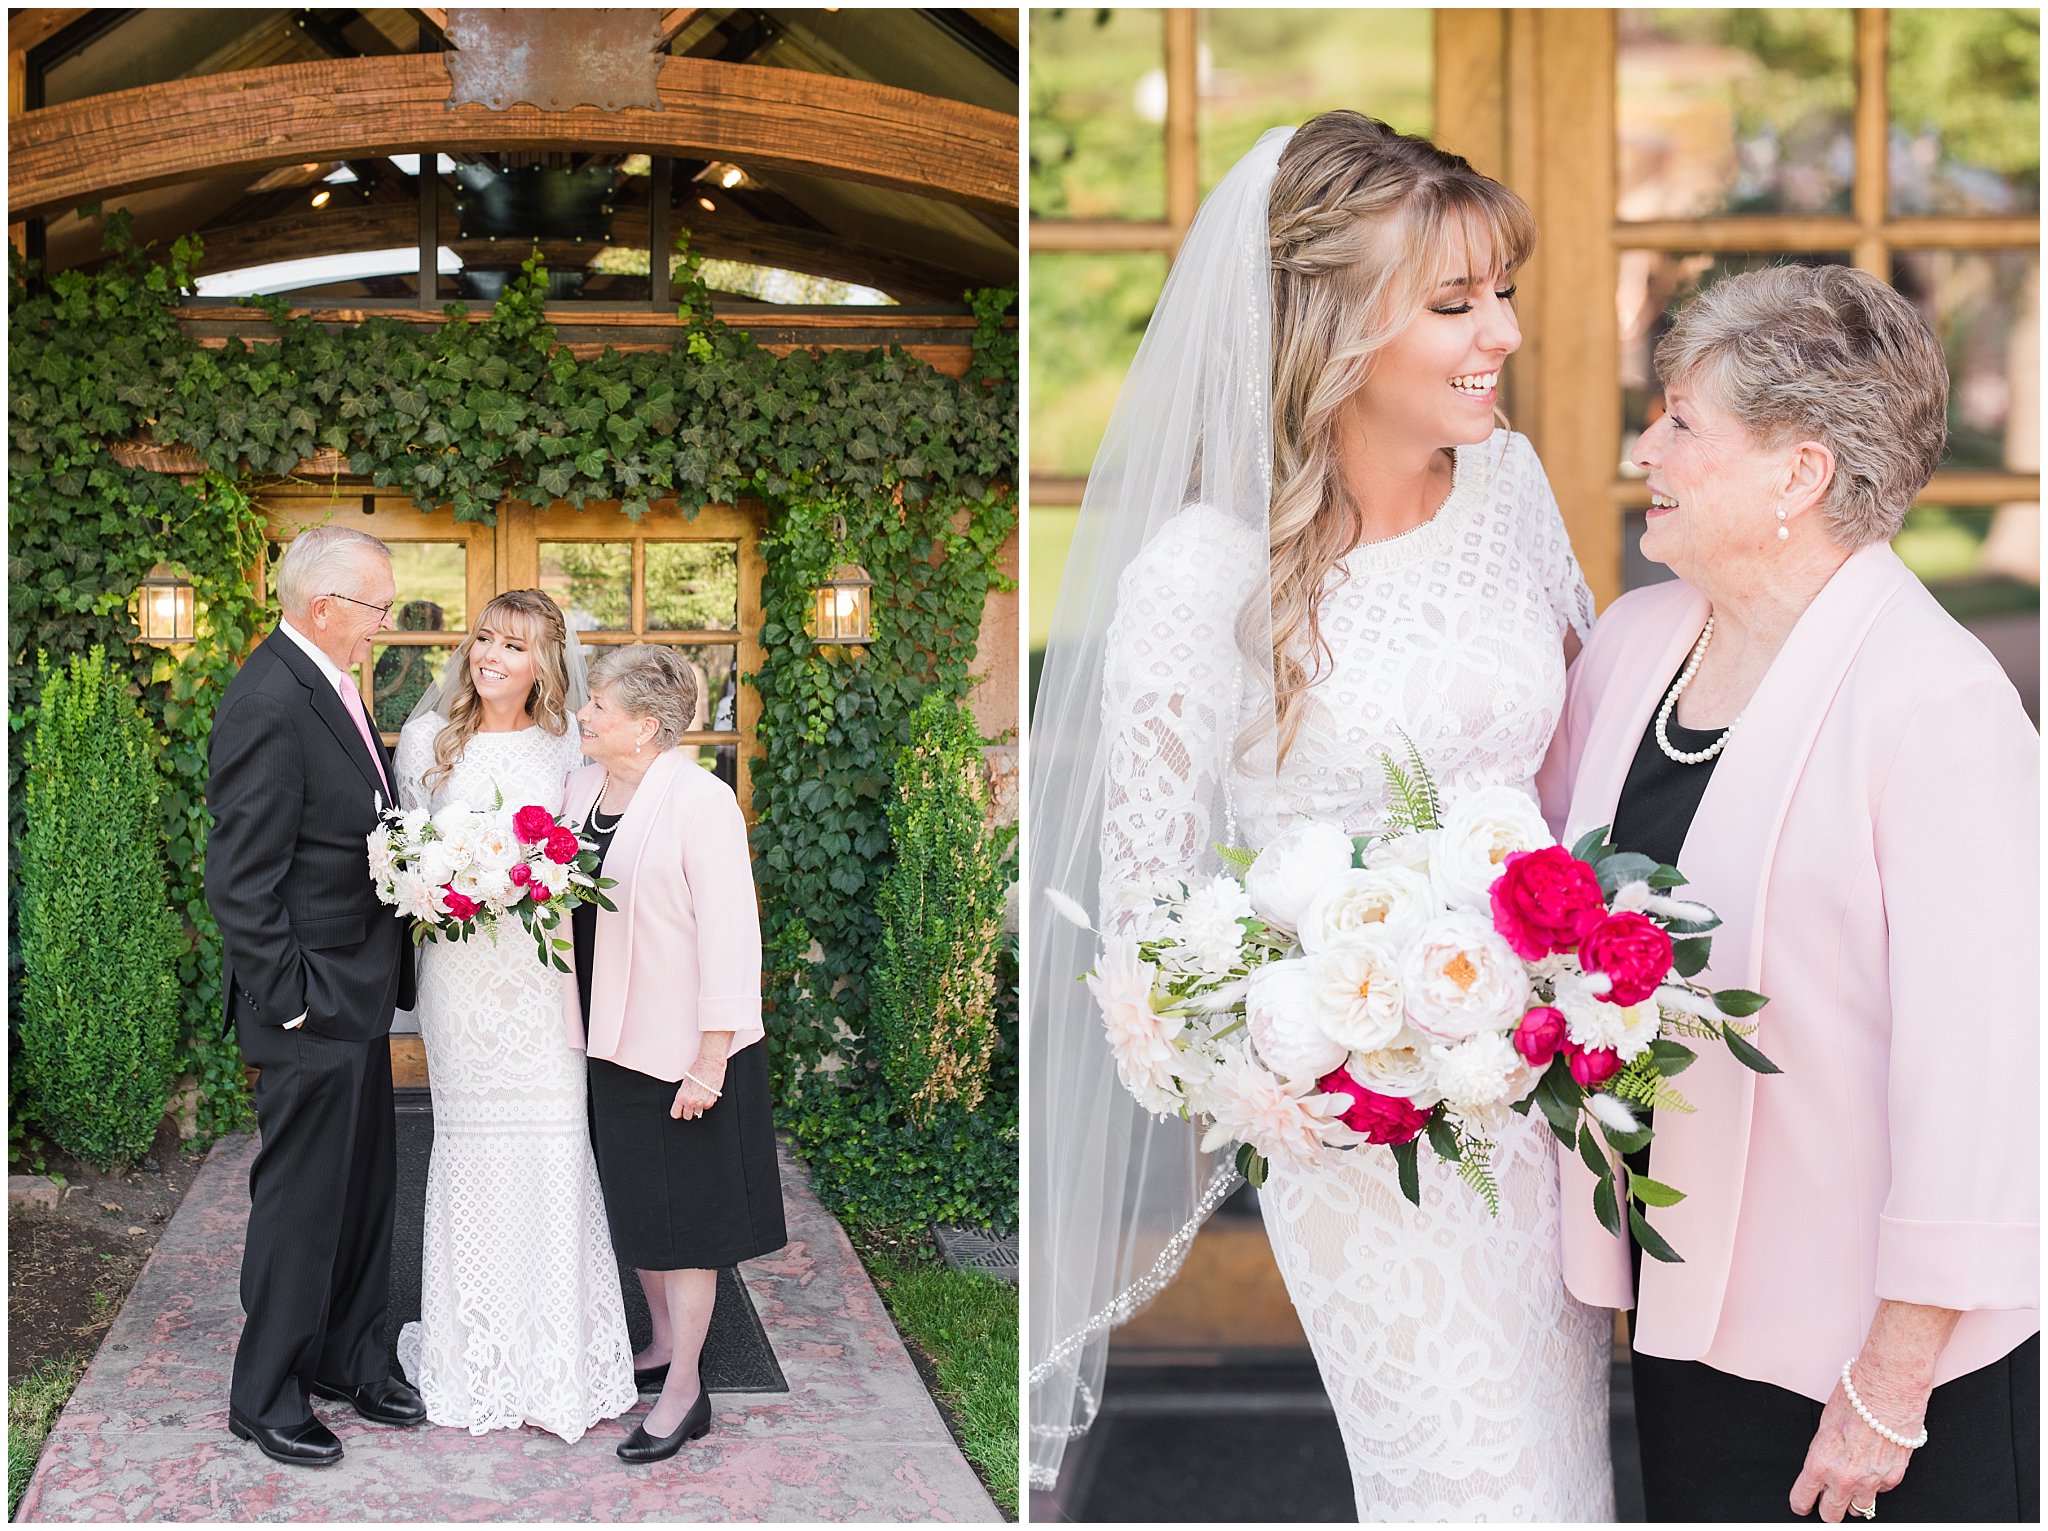 Family photos at Wadley Farms Summer Wedding | Jessie and Dallin Photography